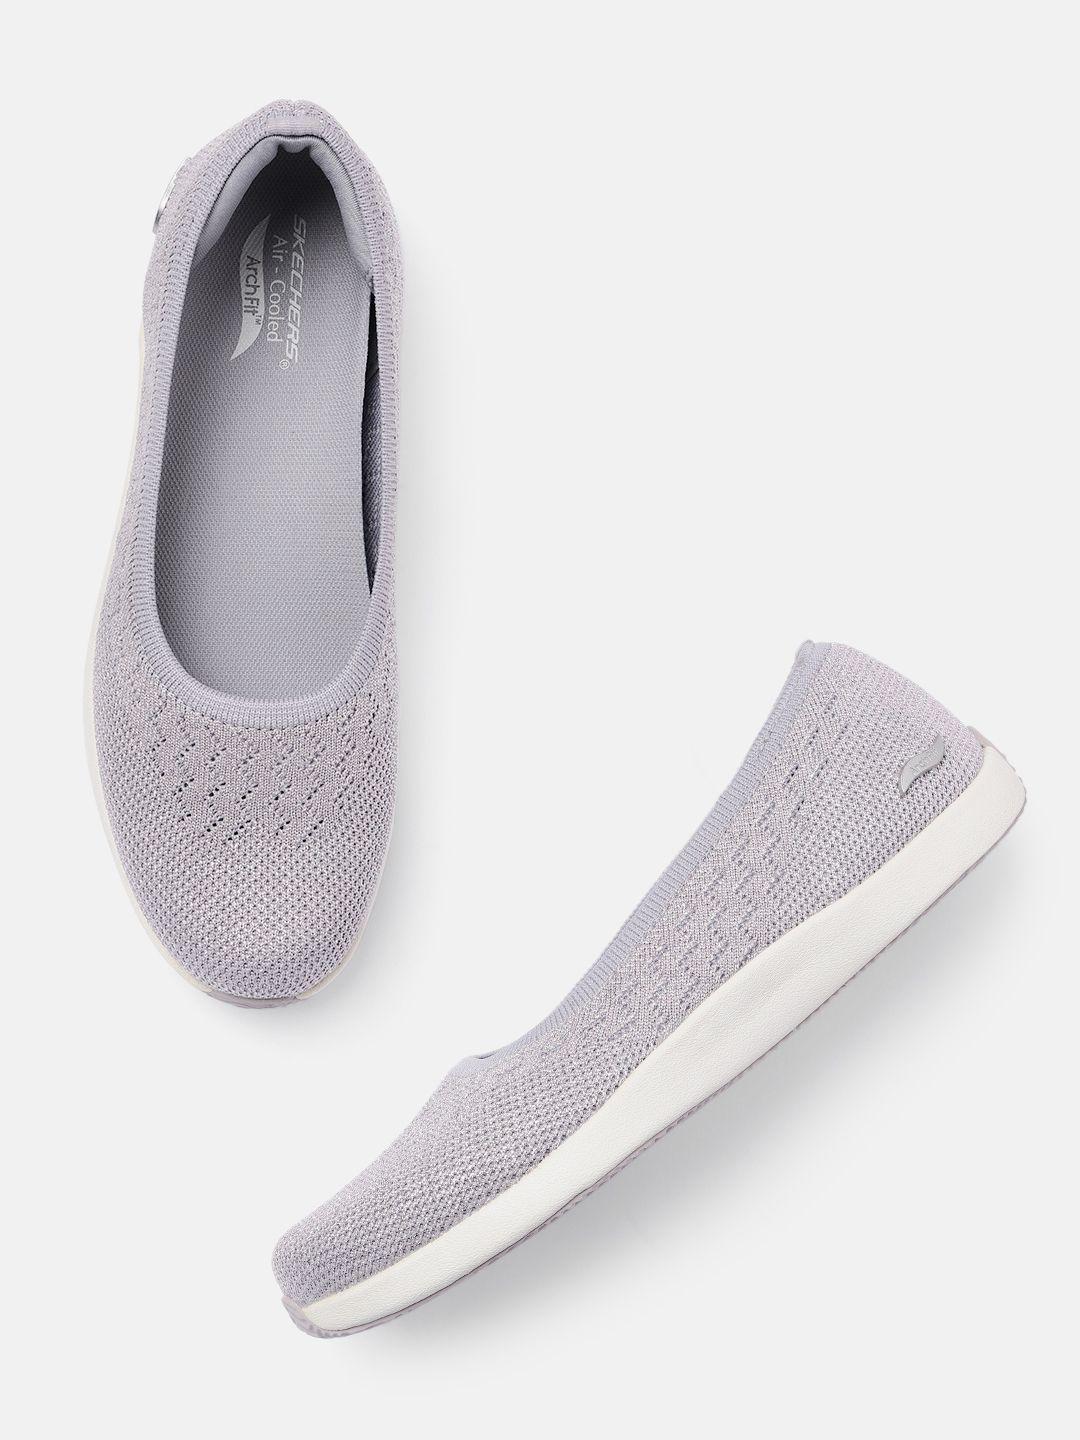 skechers-arch-fit-chic-shimmer-finish-ballerinas